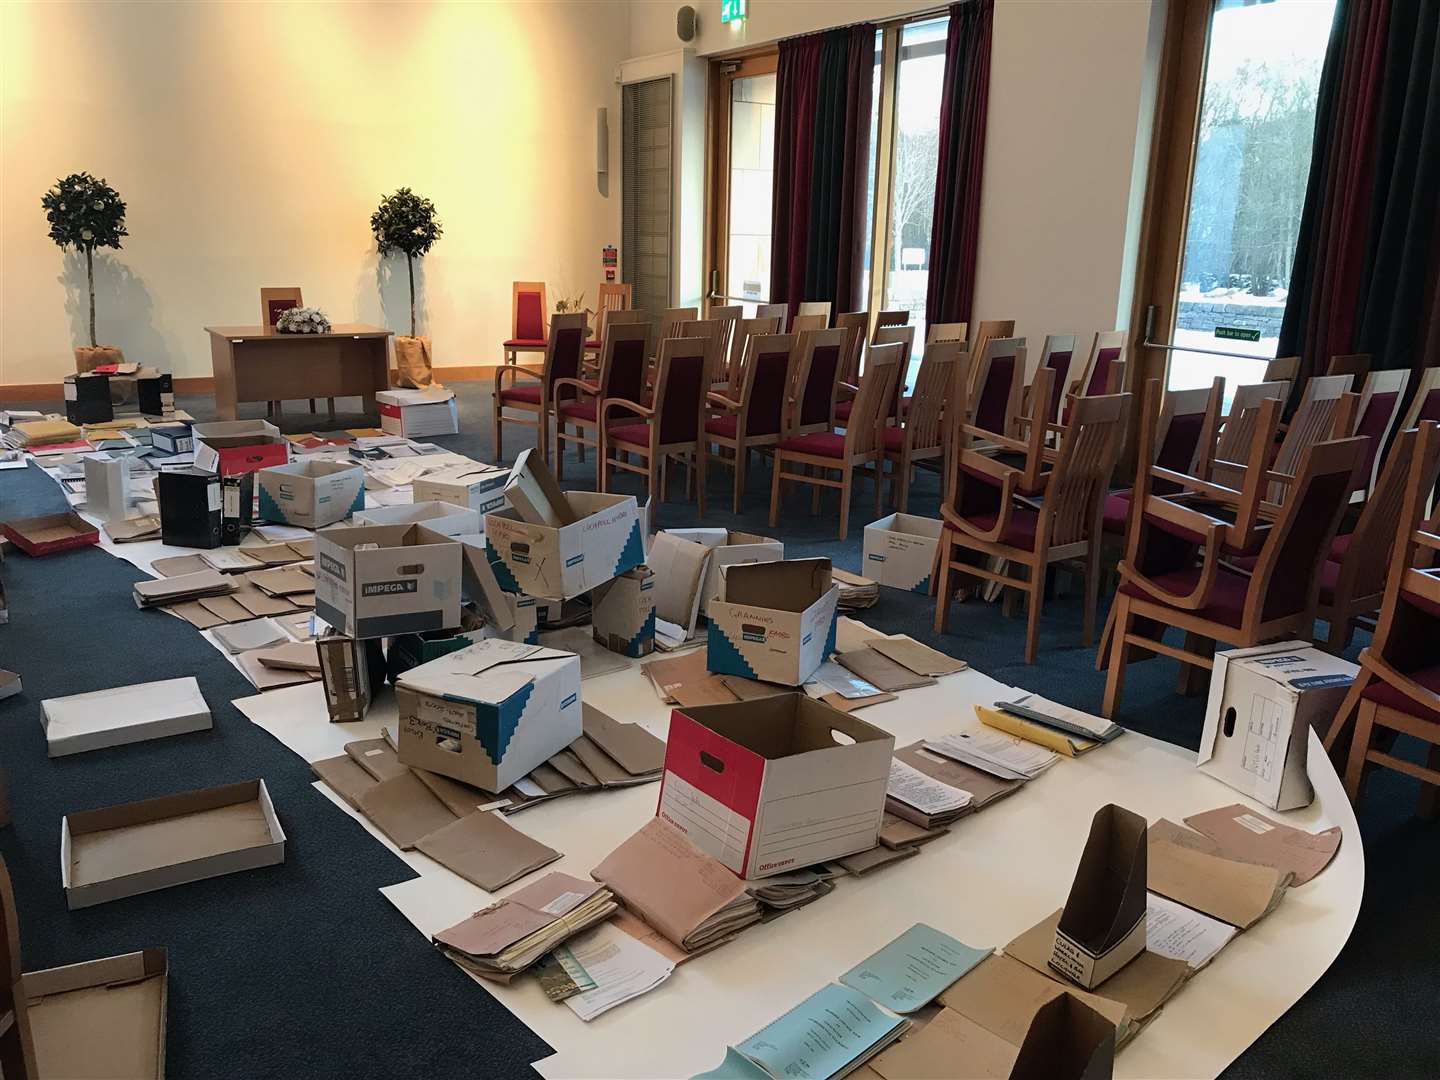 The documents were removed to the ceremony room at the Inverness Registration Centre.